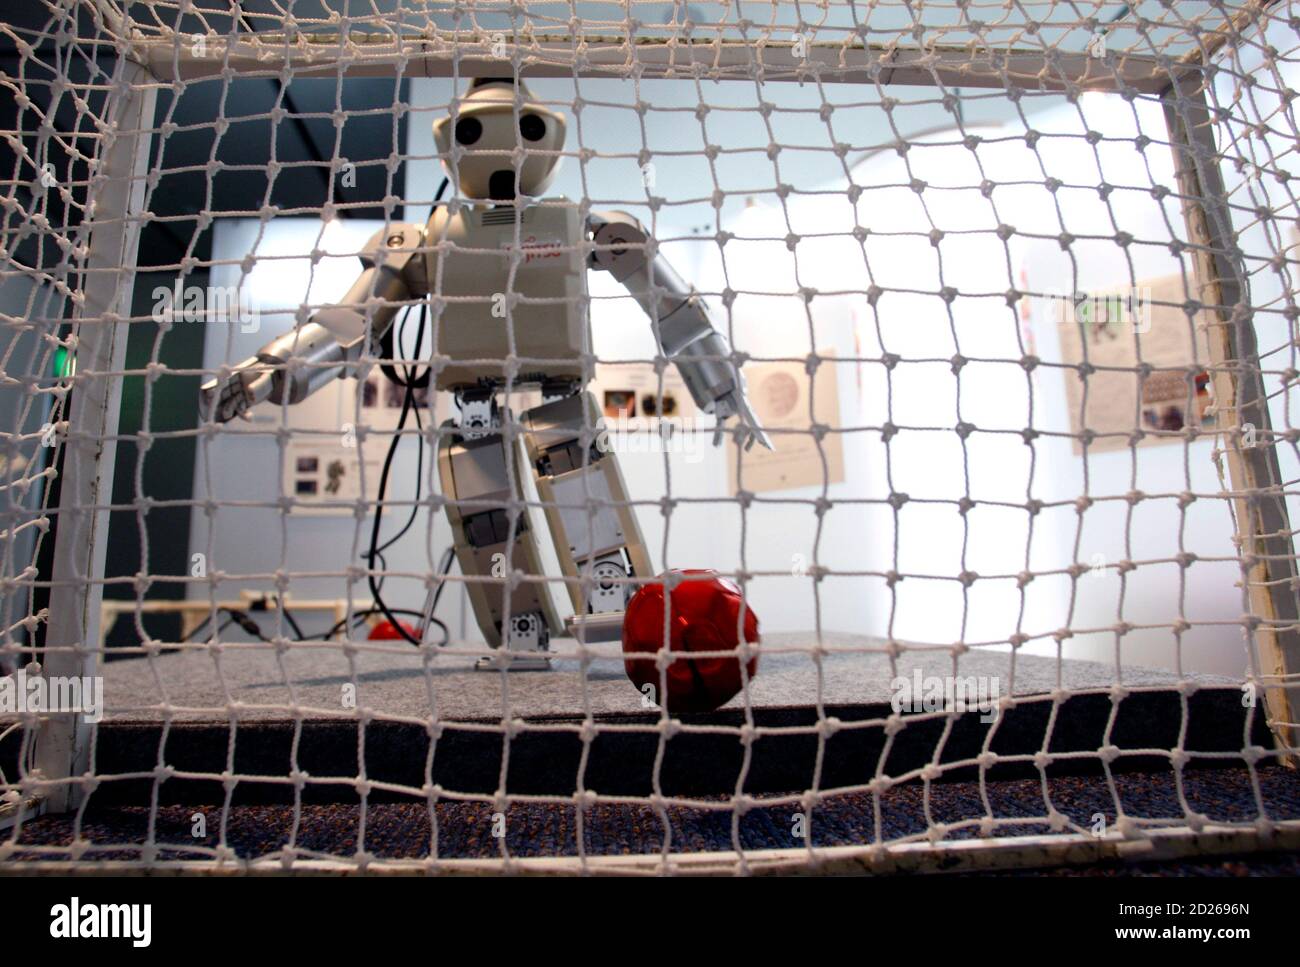 Fujitsu Automation's miniature humanoid robot HOAP-3 kicks a ball during  the Robot award 2007 in Tokyo December 20, 2007. HOAP-3 is able to track  and grab a small ball with image recognition